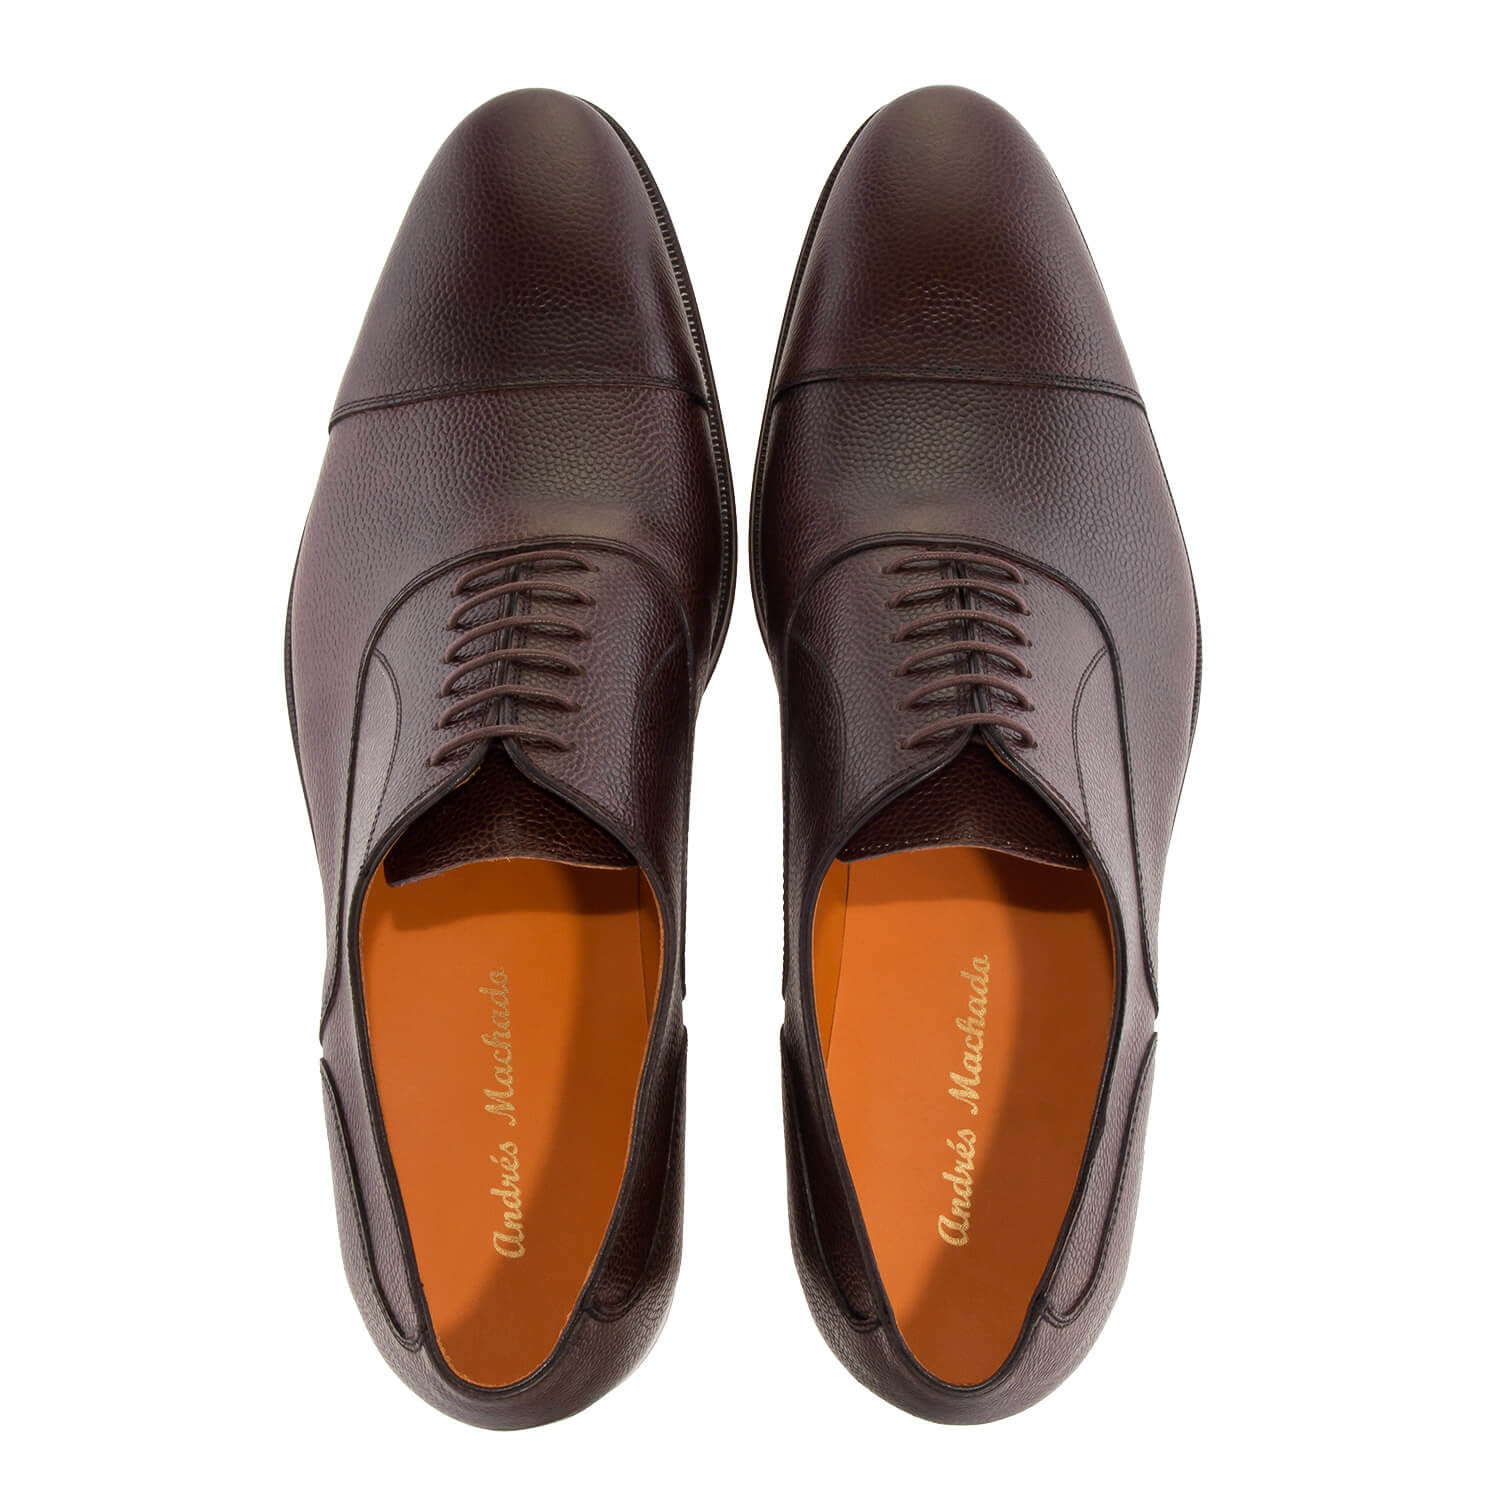 Oxford style Shoes in Dark Brown Grained Leather 